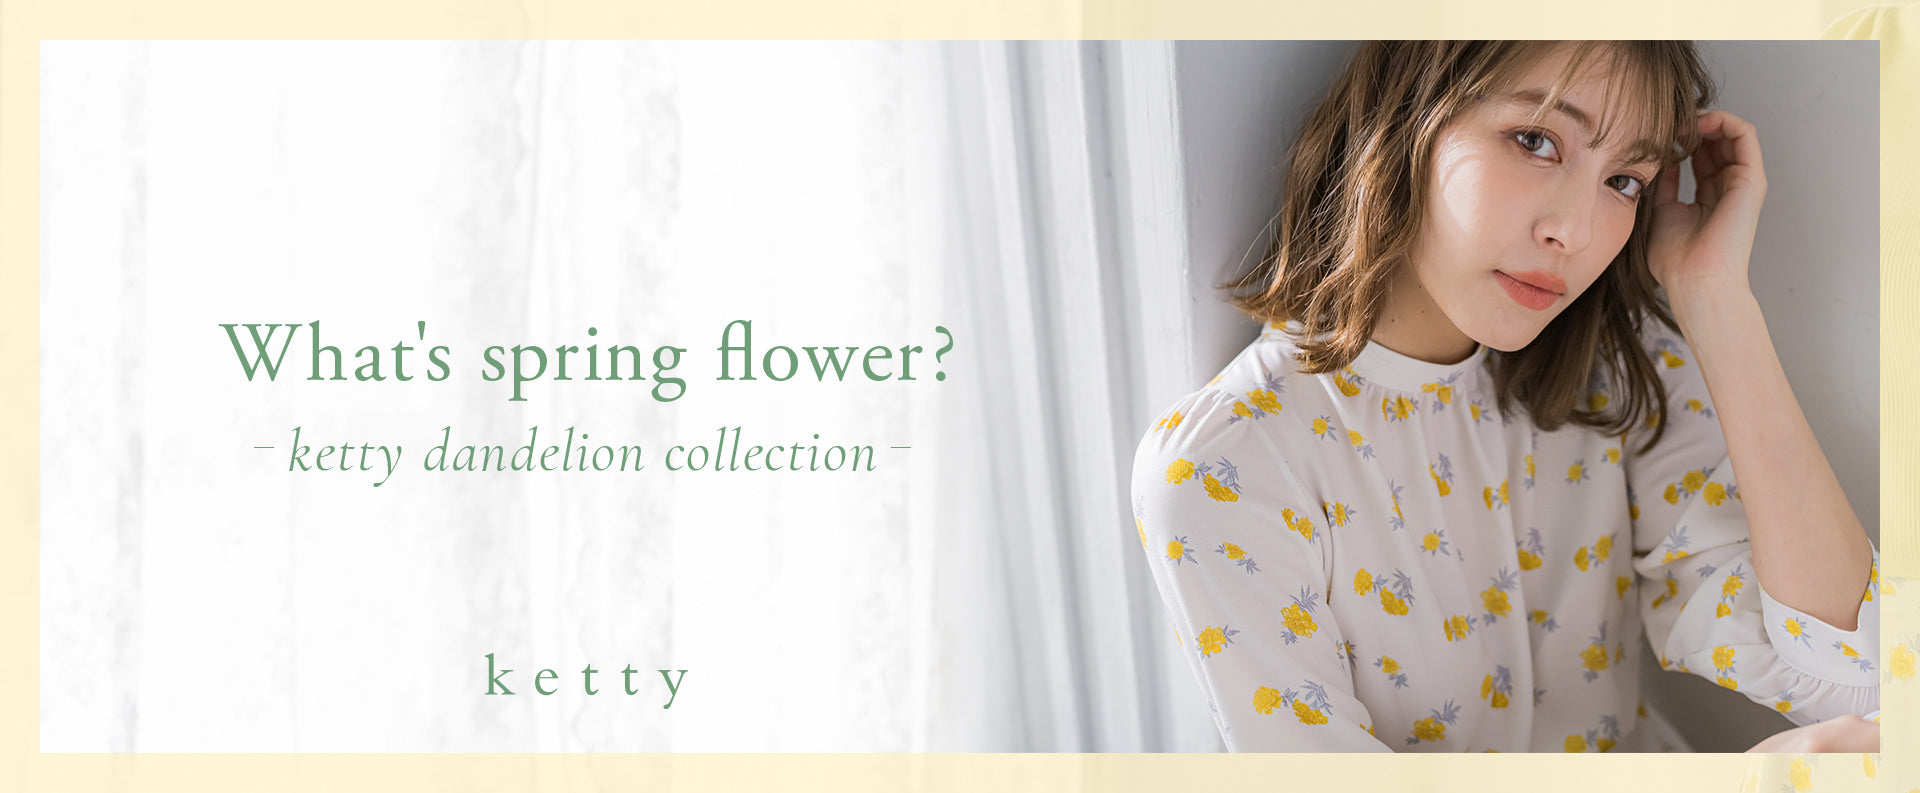 What's spring flower？-ketty dandelion collection-